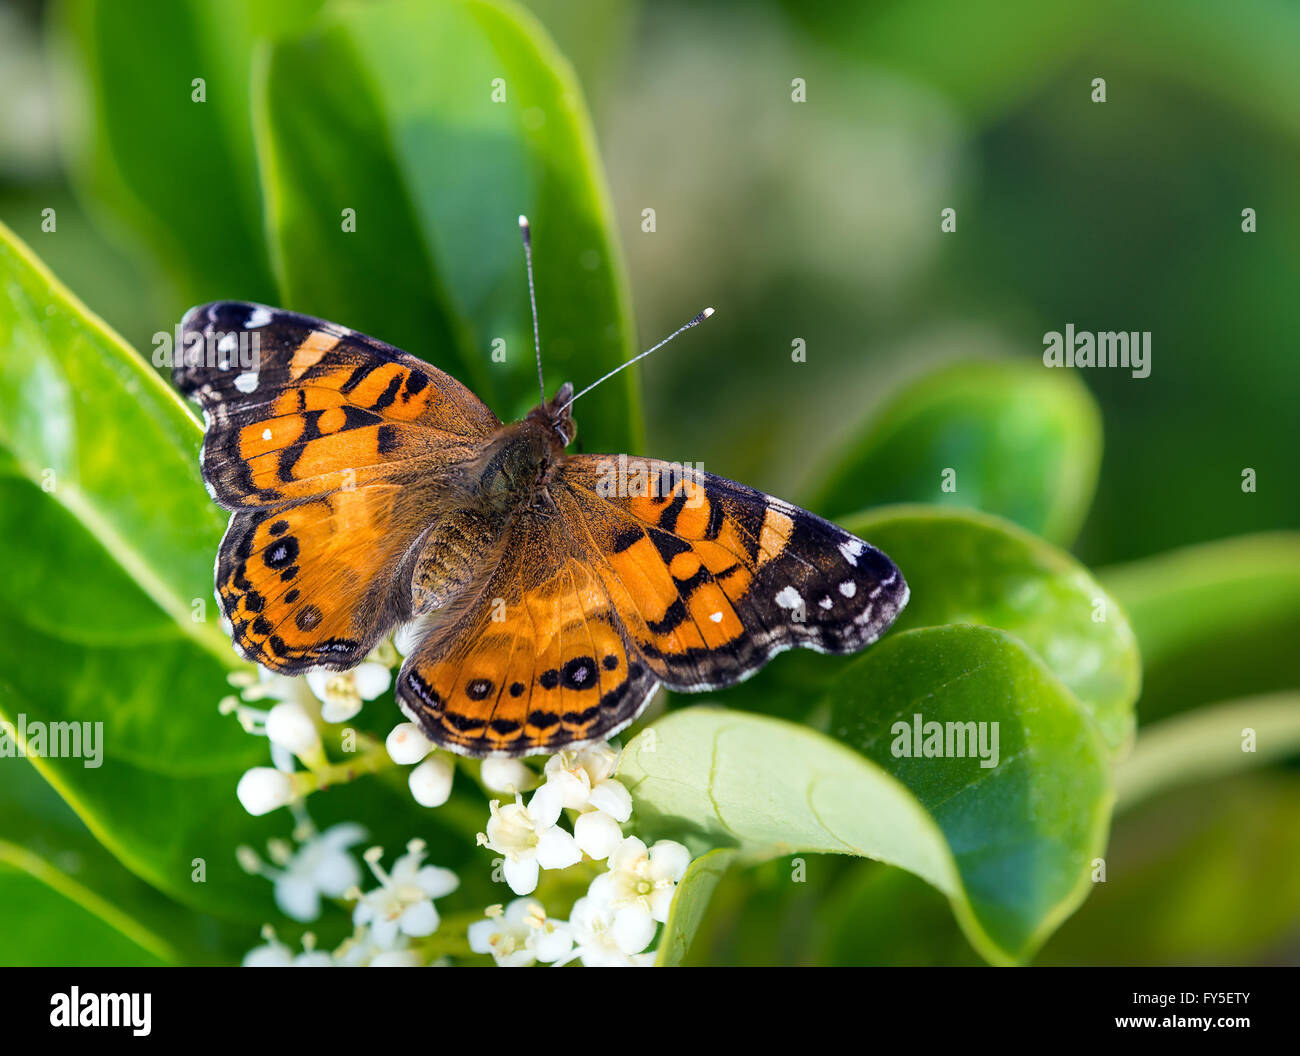 American Painted Lady butterfly (Vanessa virginiensis) feeding on white shrub flowers Stock Photo